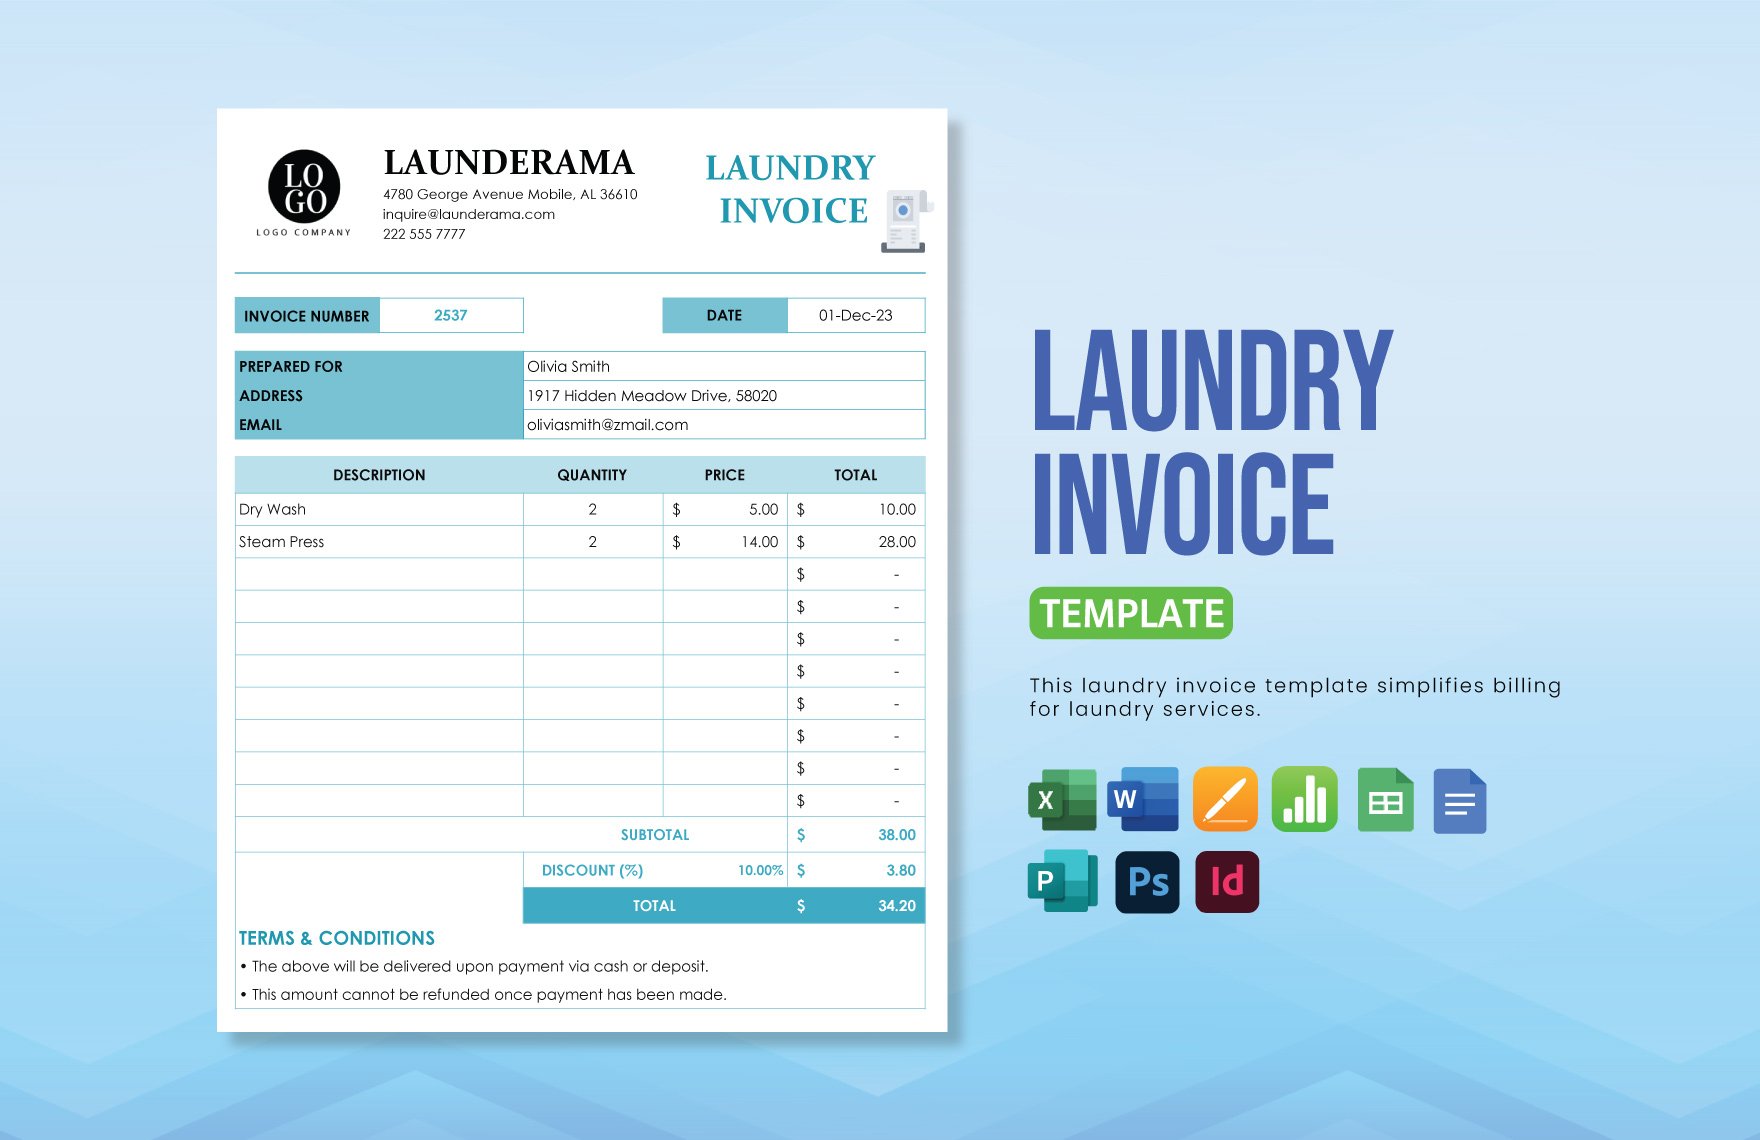 Laundry Invoice Template in Word, Google Docs, Excel, Google Sheets, Illustrator, Apple Pages, Publisher, InDesign, Apple Numbers